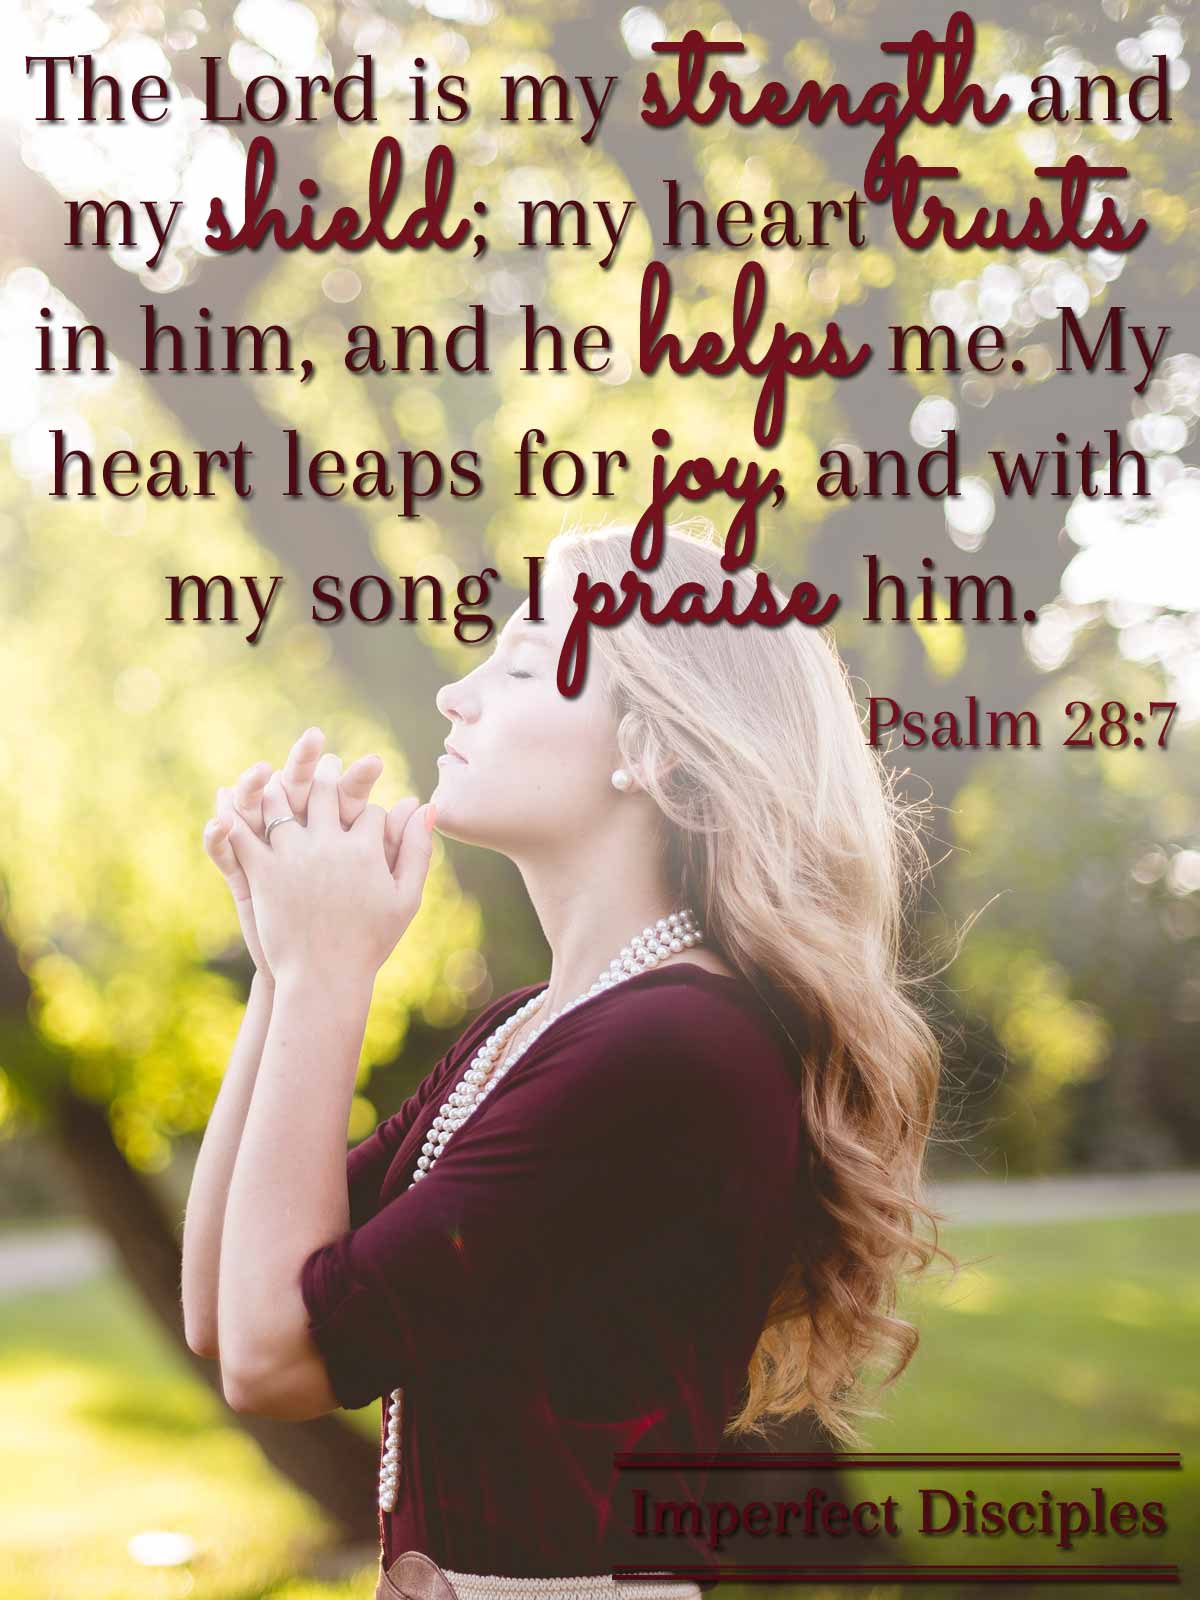 Scripture Memory Song - Psalm 28:7